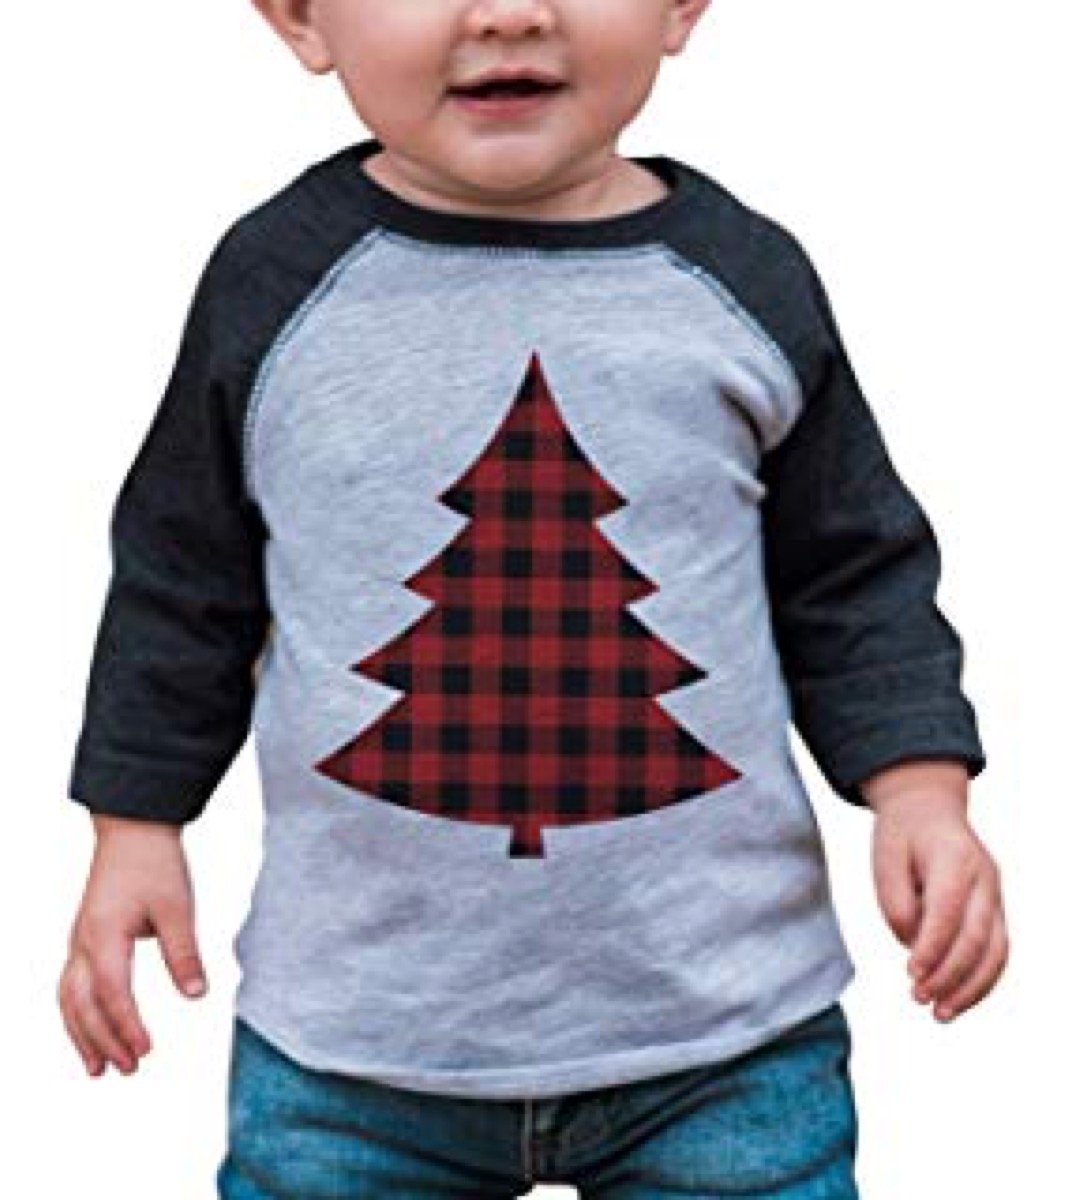 little white baby in gray shirt with red and black christmas tree on it